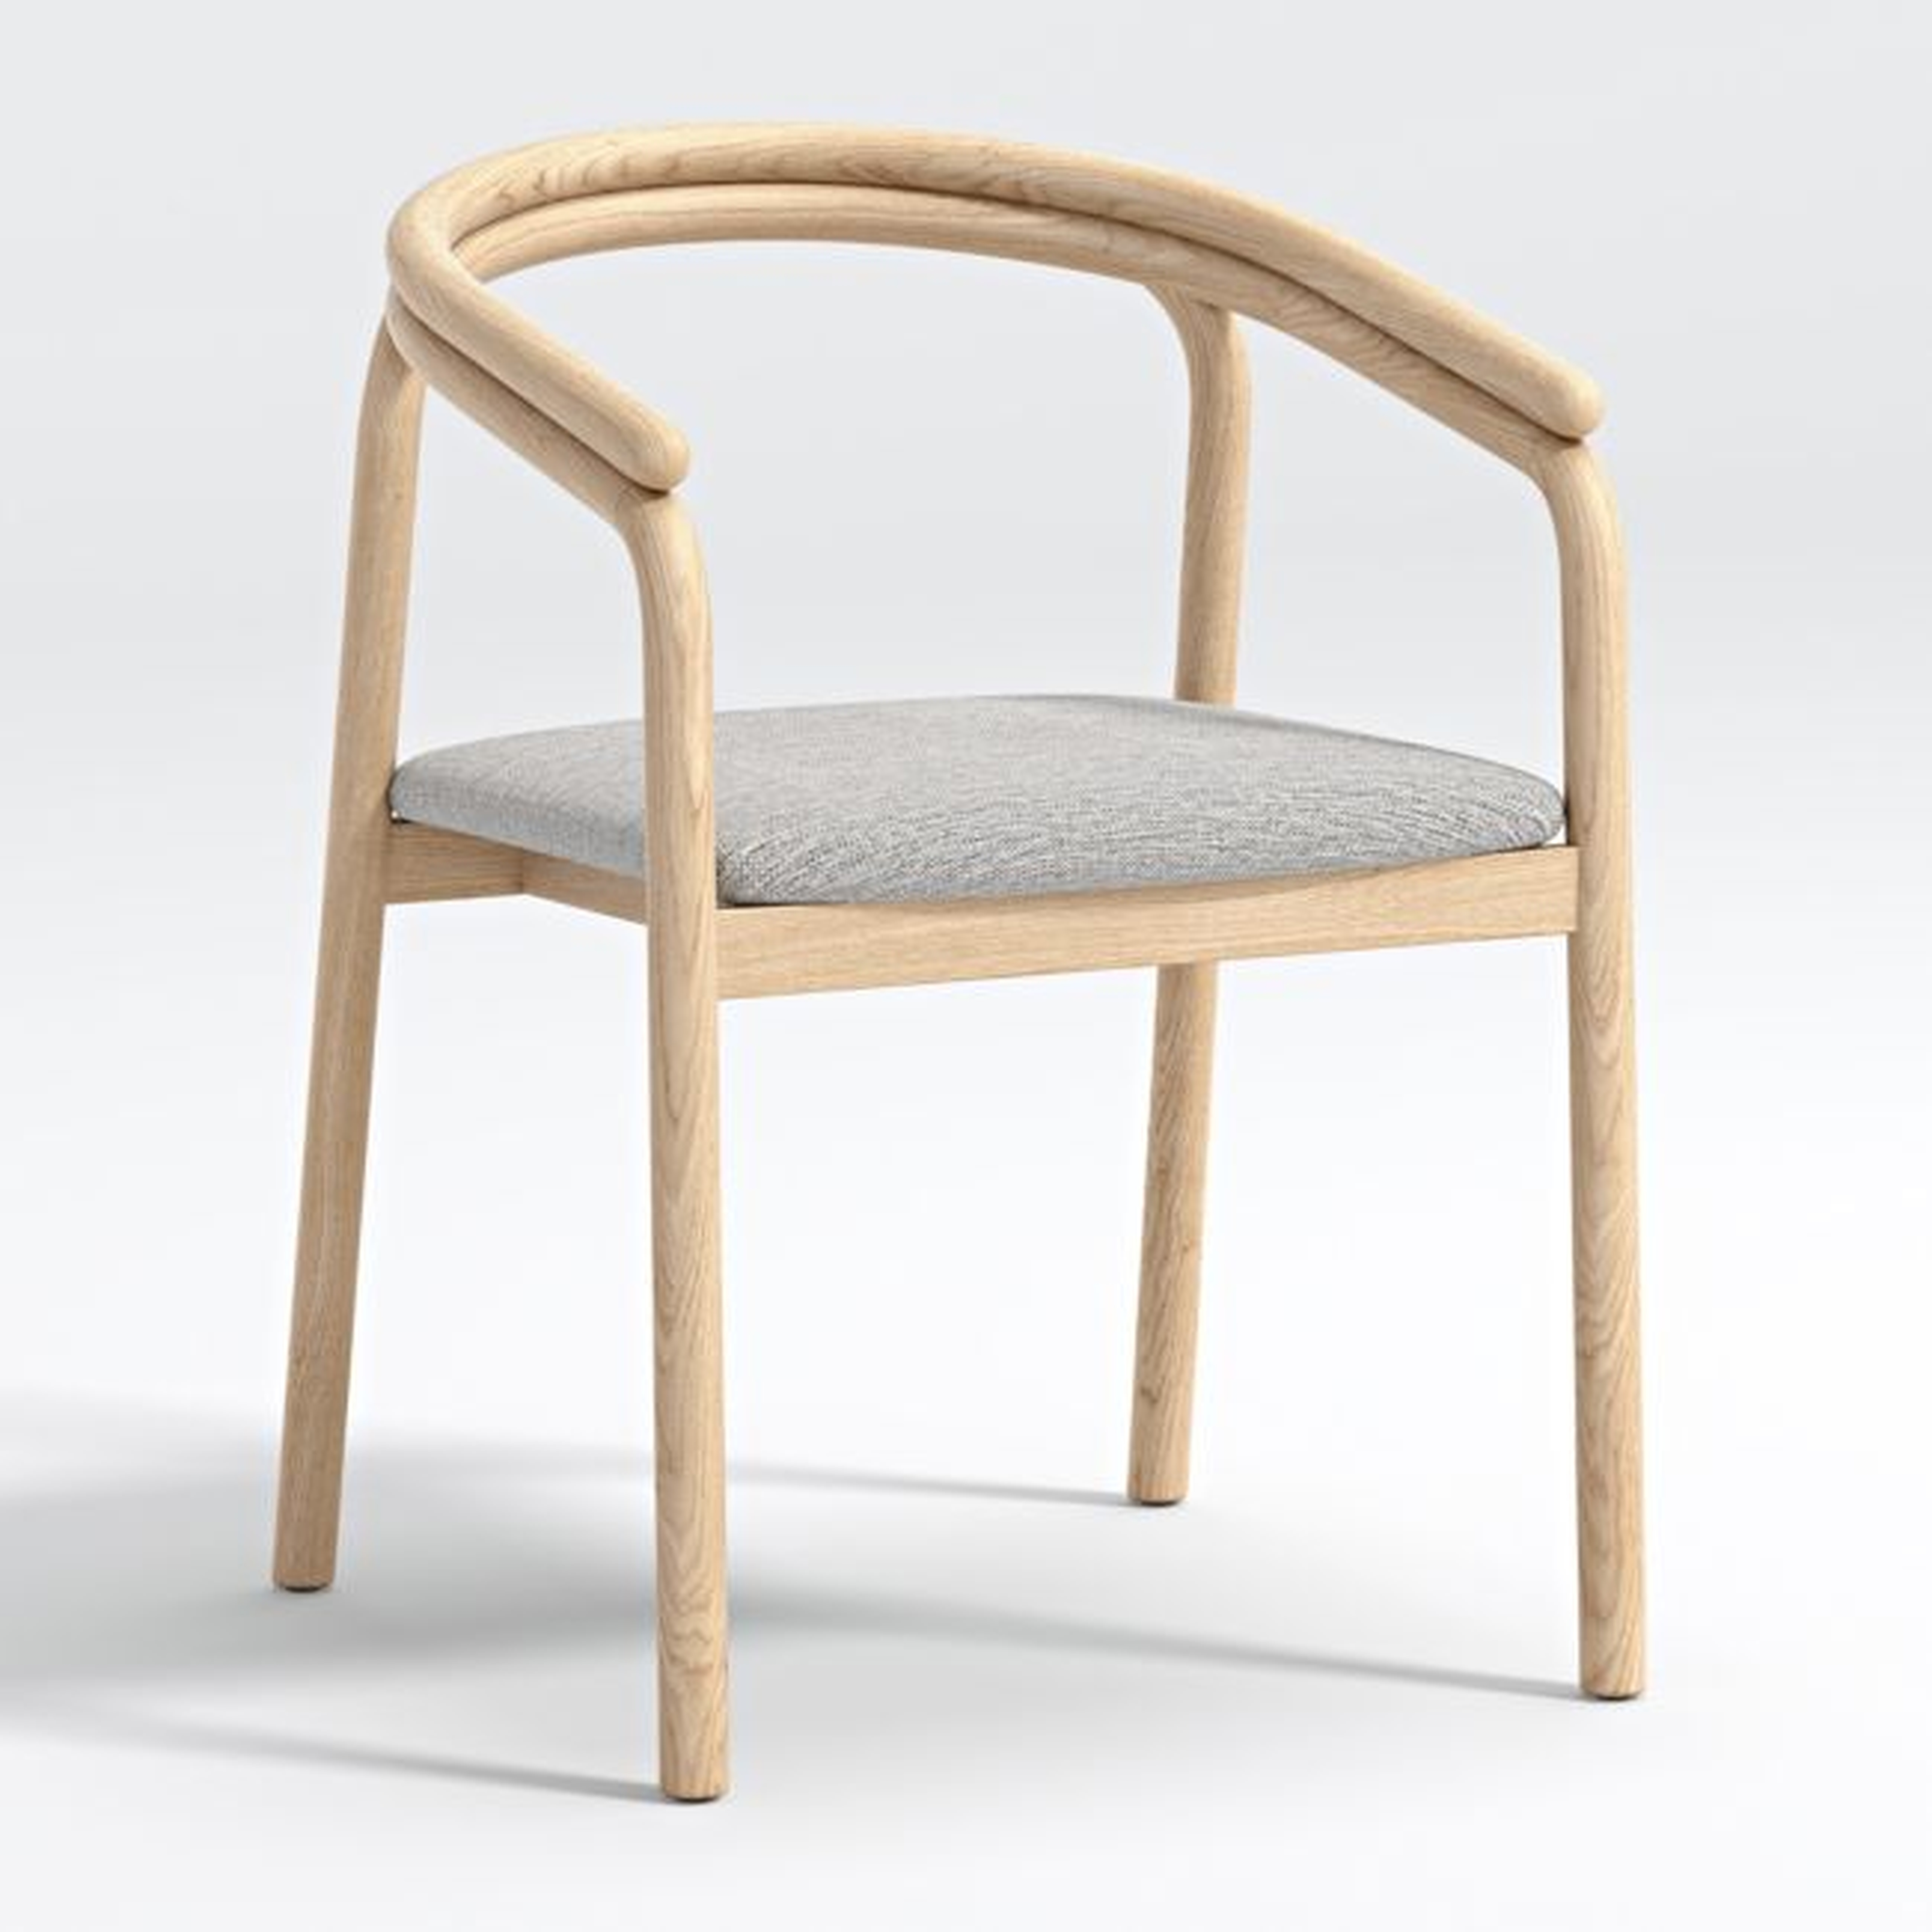 Redonda Wood Upholstered Dining Chair - Crate and Barrel